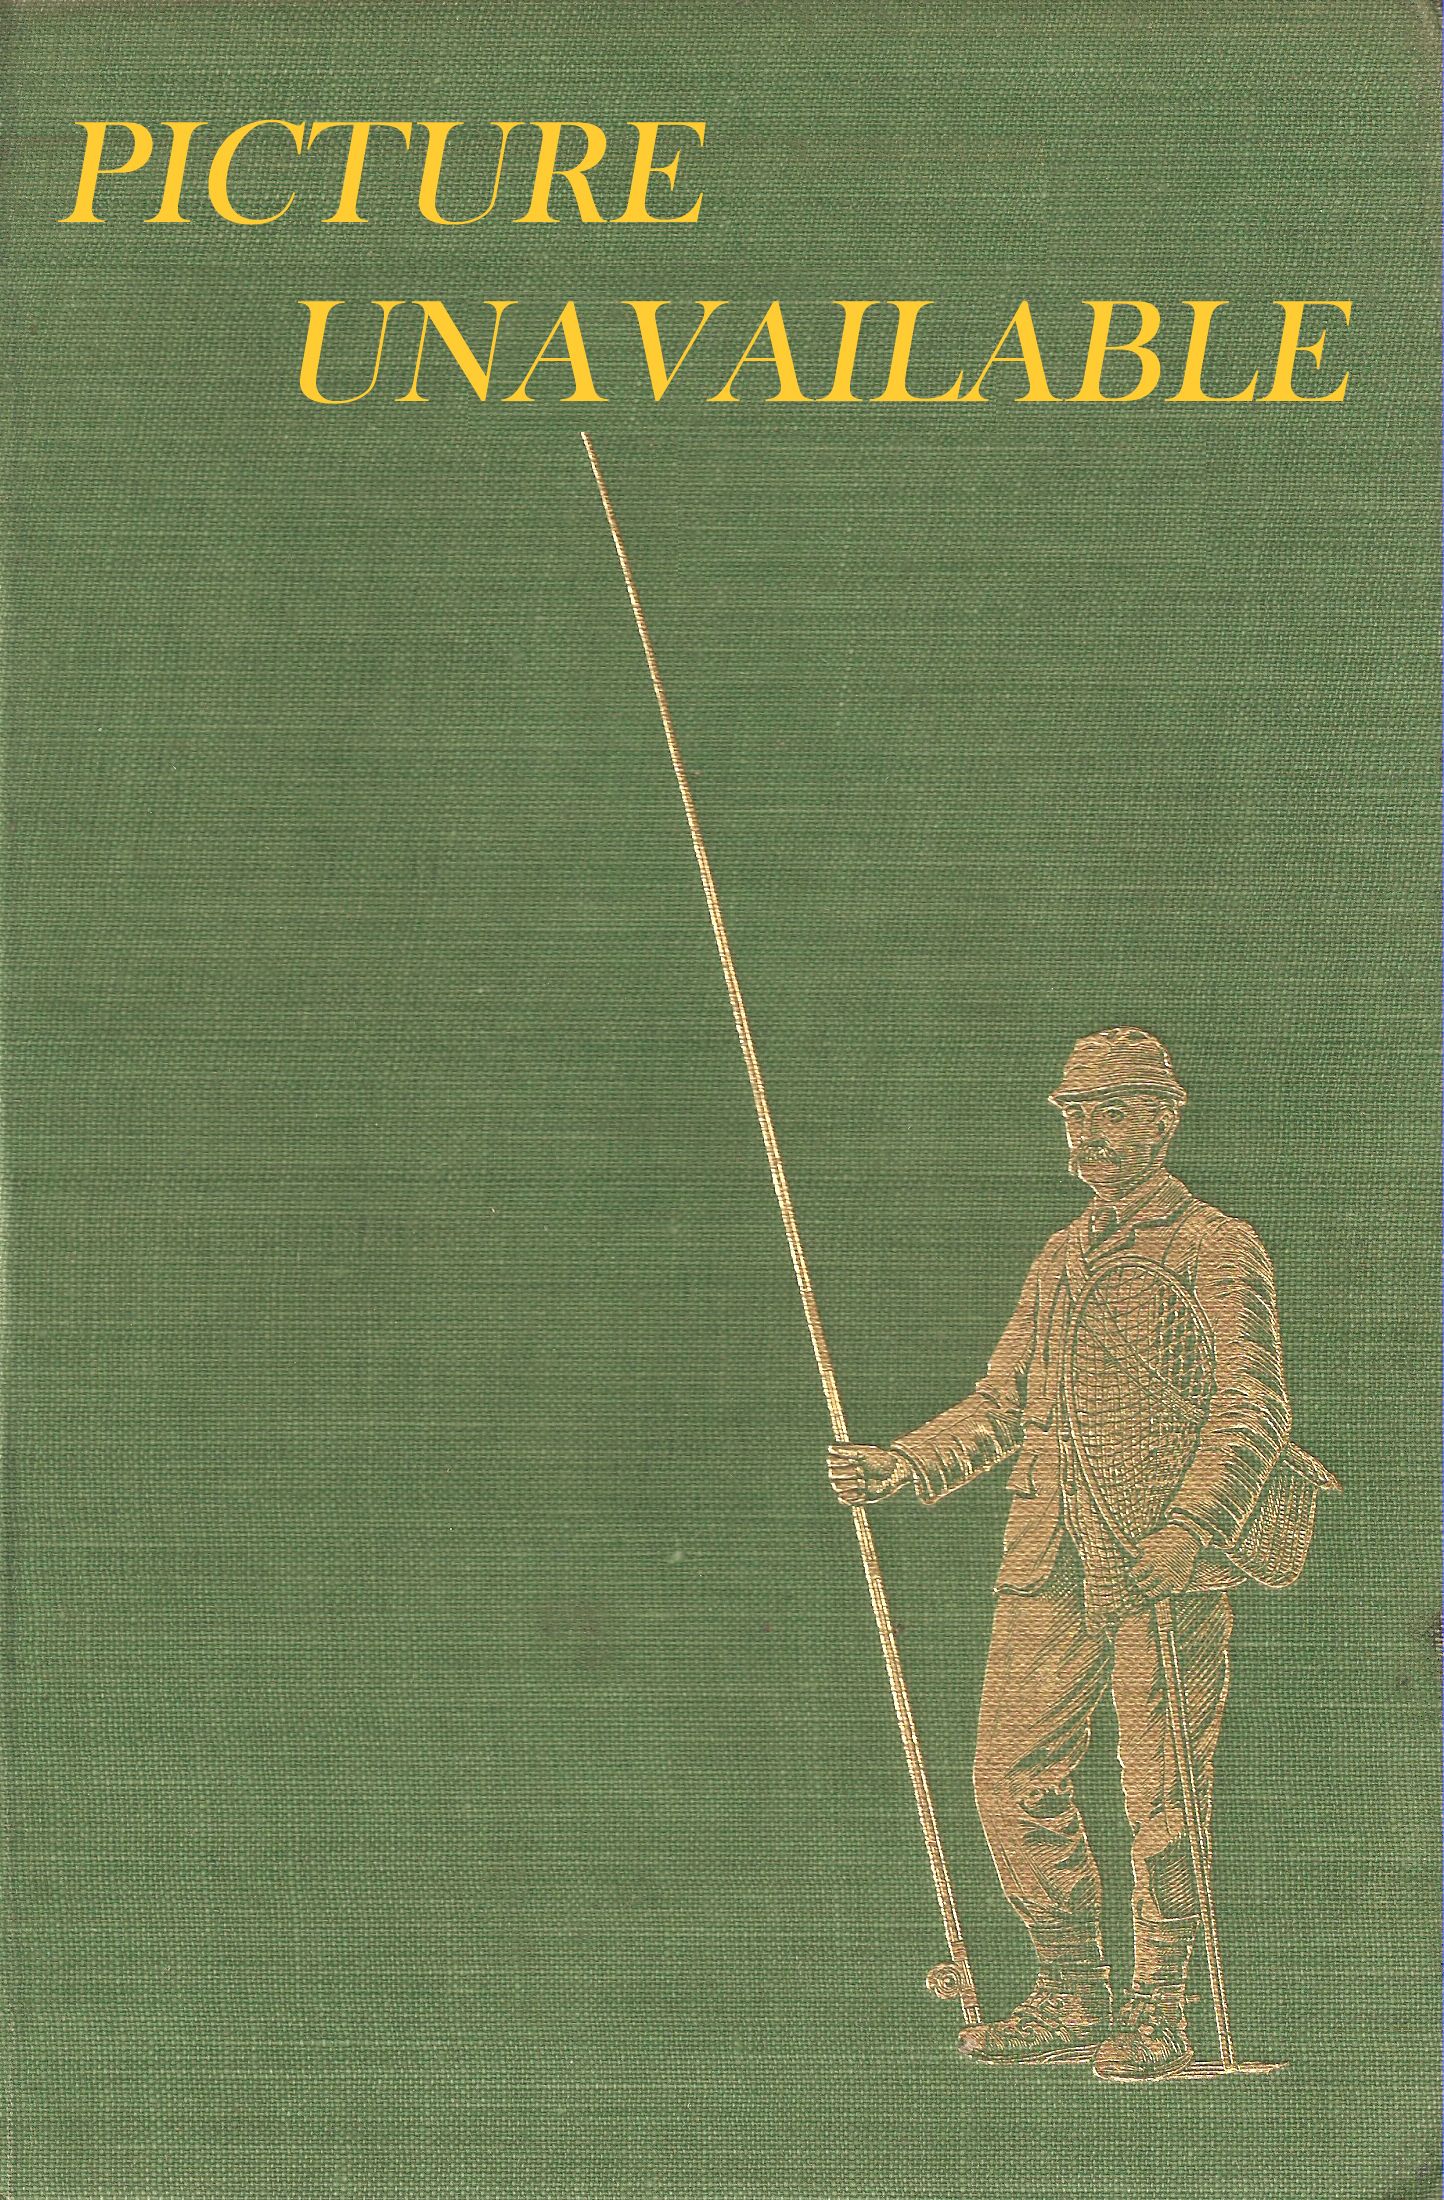 CREEL: A FISHING MAGAZINE. Volume 3, number 11. May 1966.